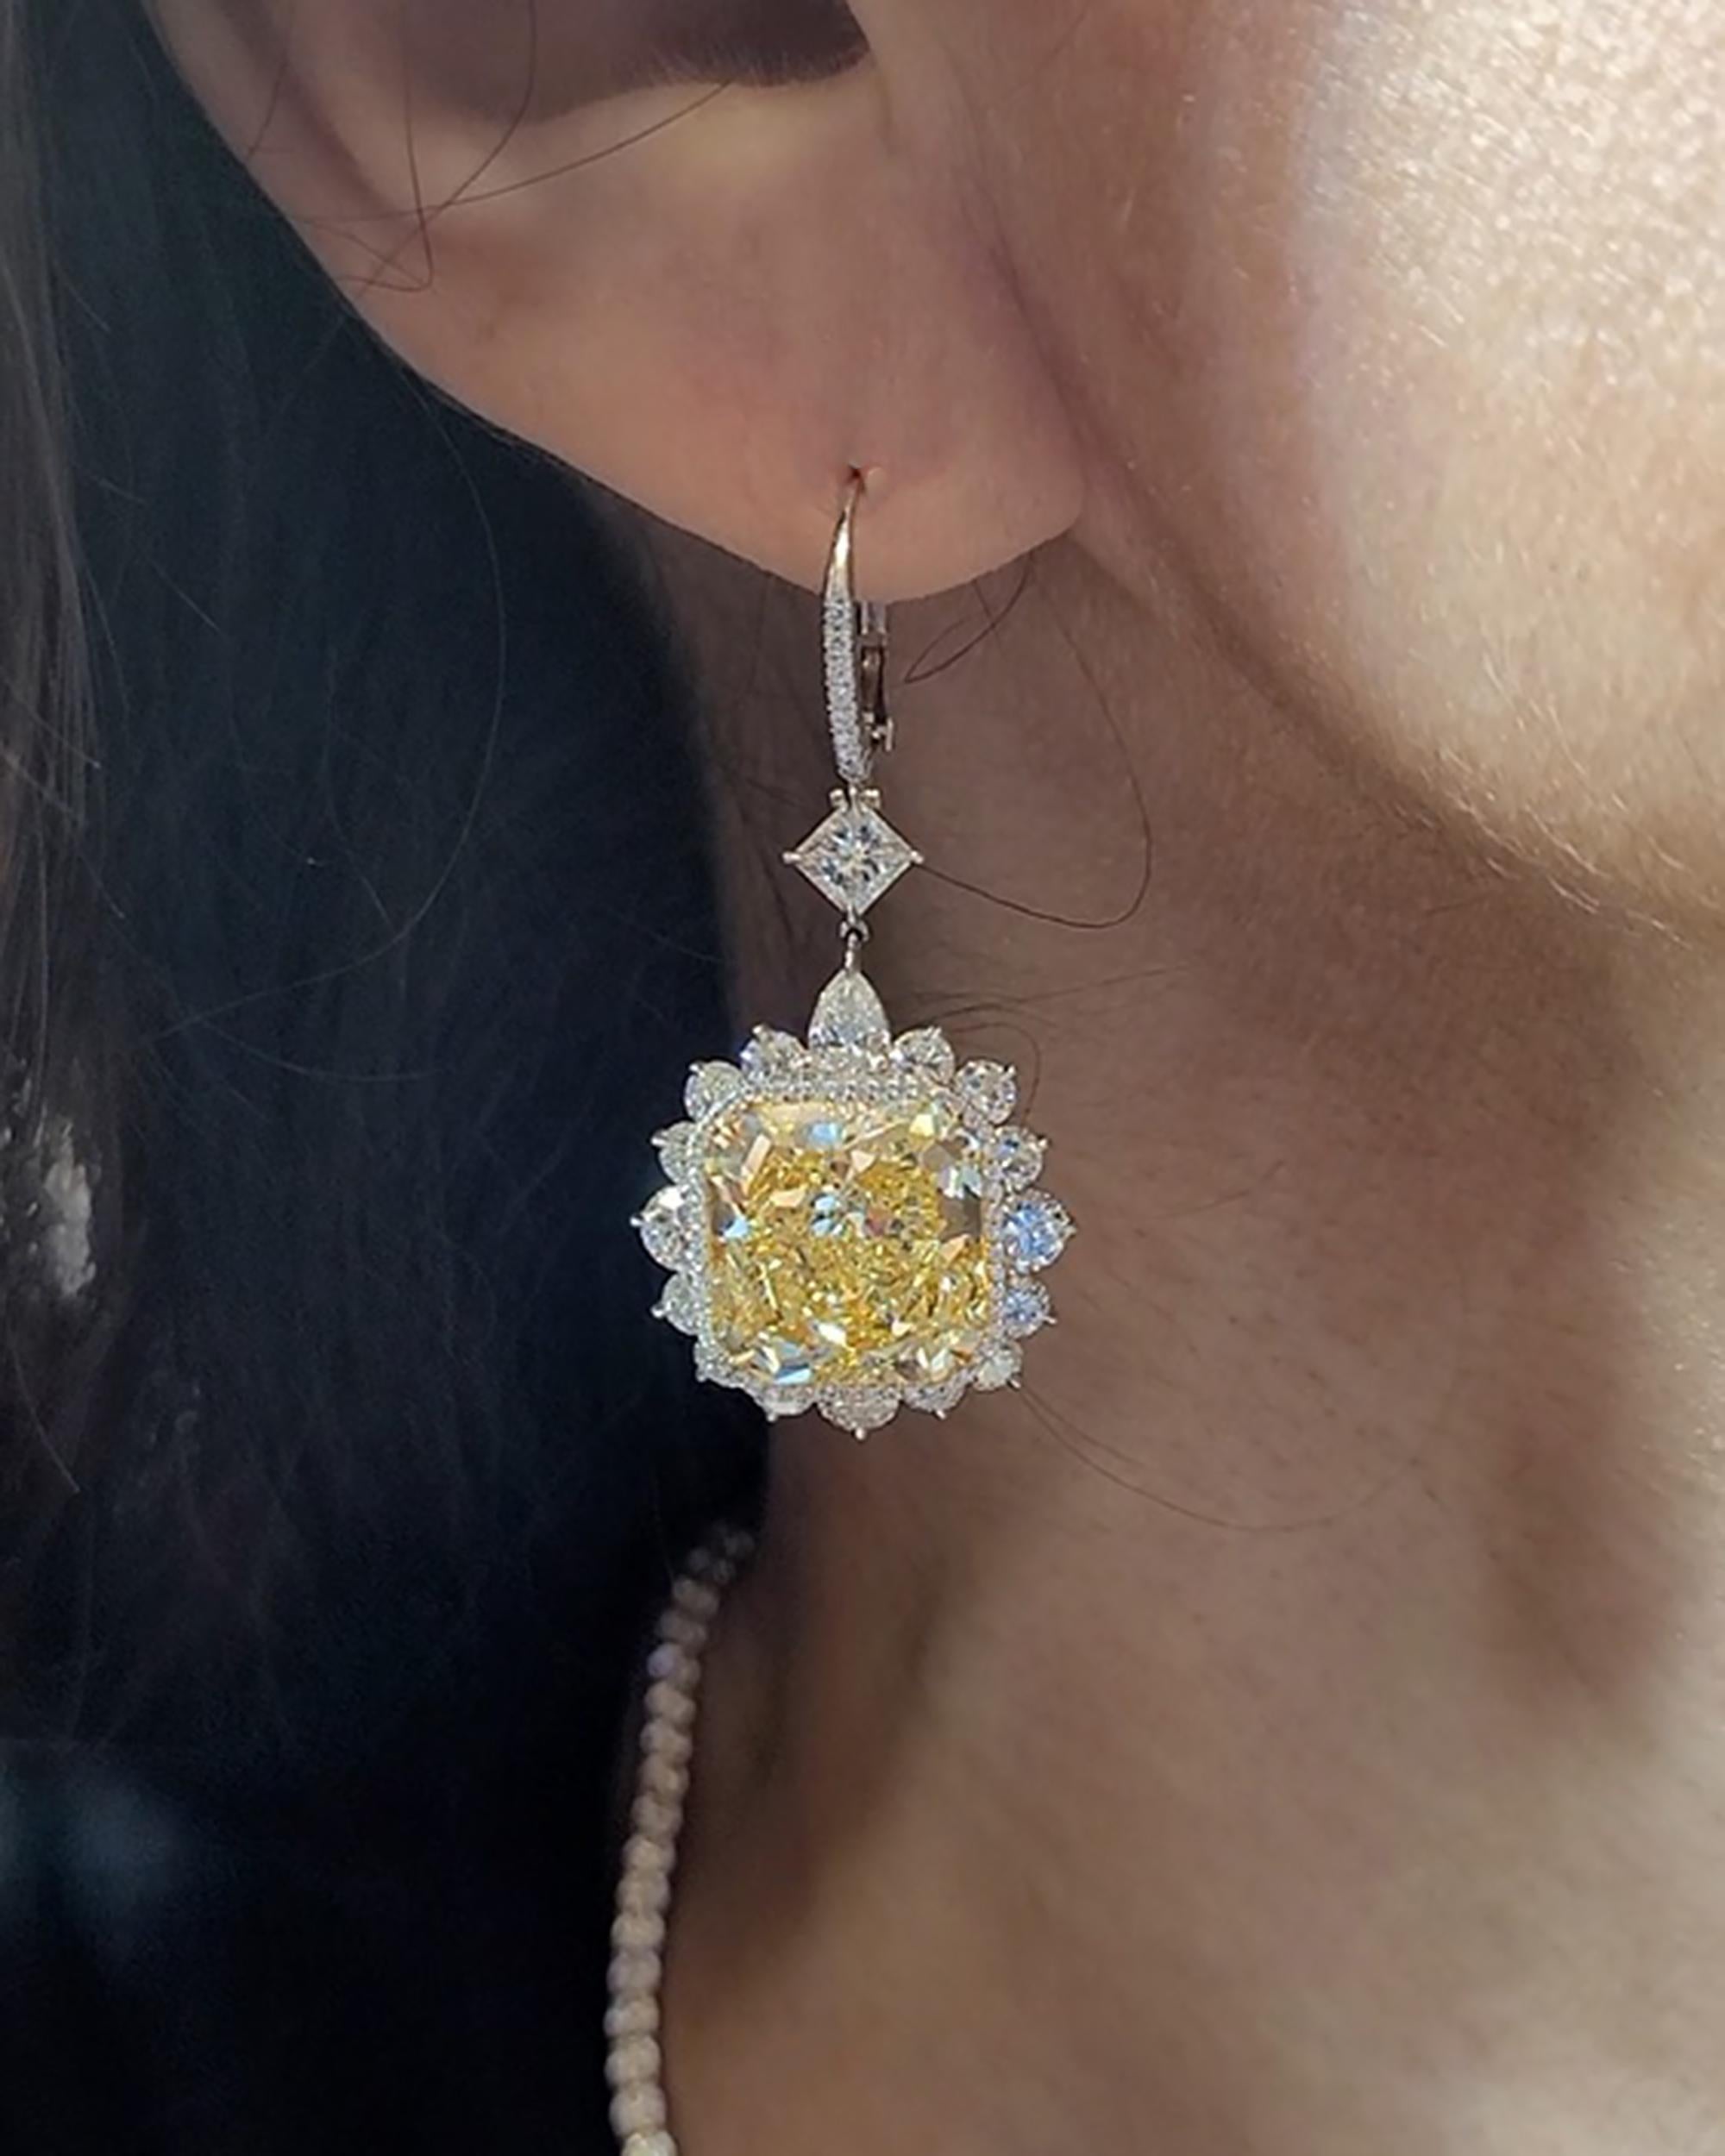 A pair of important earrings featuring two radiant fancy yellow diamonds in the center - 10.16 carats and 10.61 carats.
The yellow diamonds are certified by GIA, stating that they are of VVS2 clarity.
The center stones are surrounded by 34 mixed cut